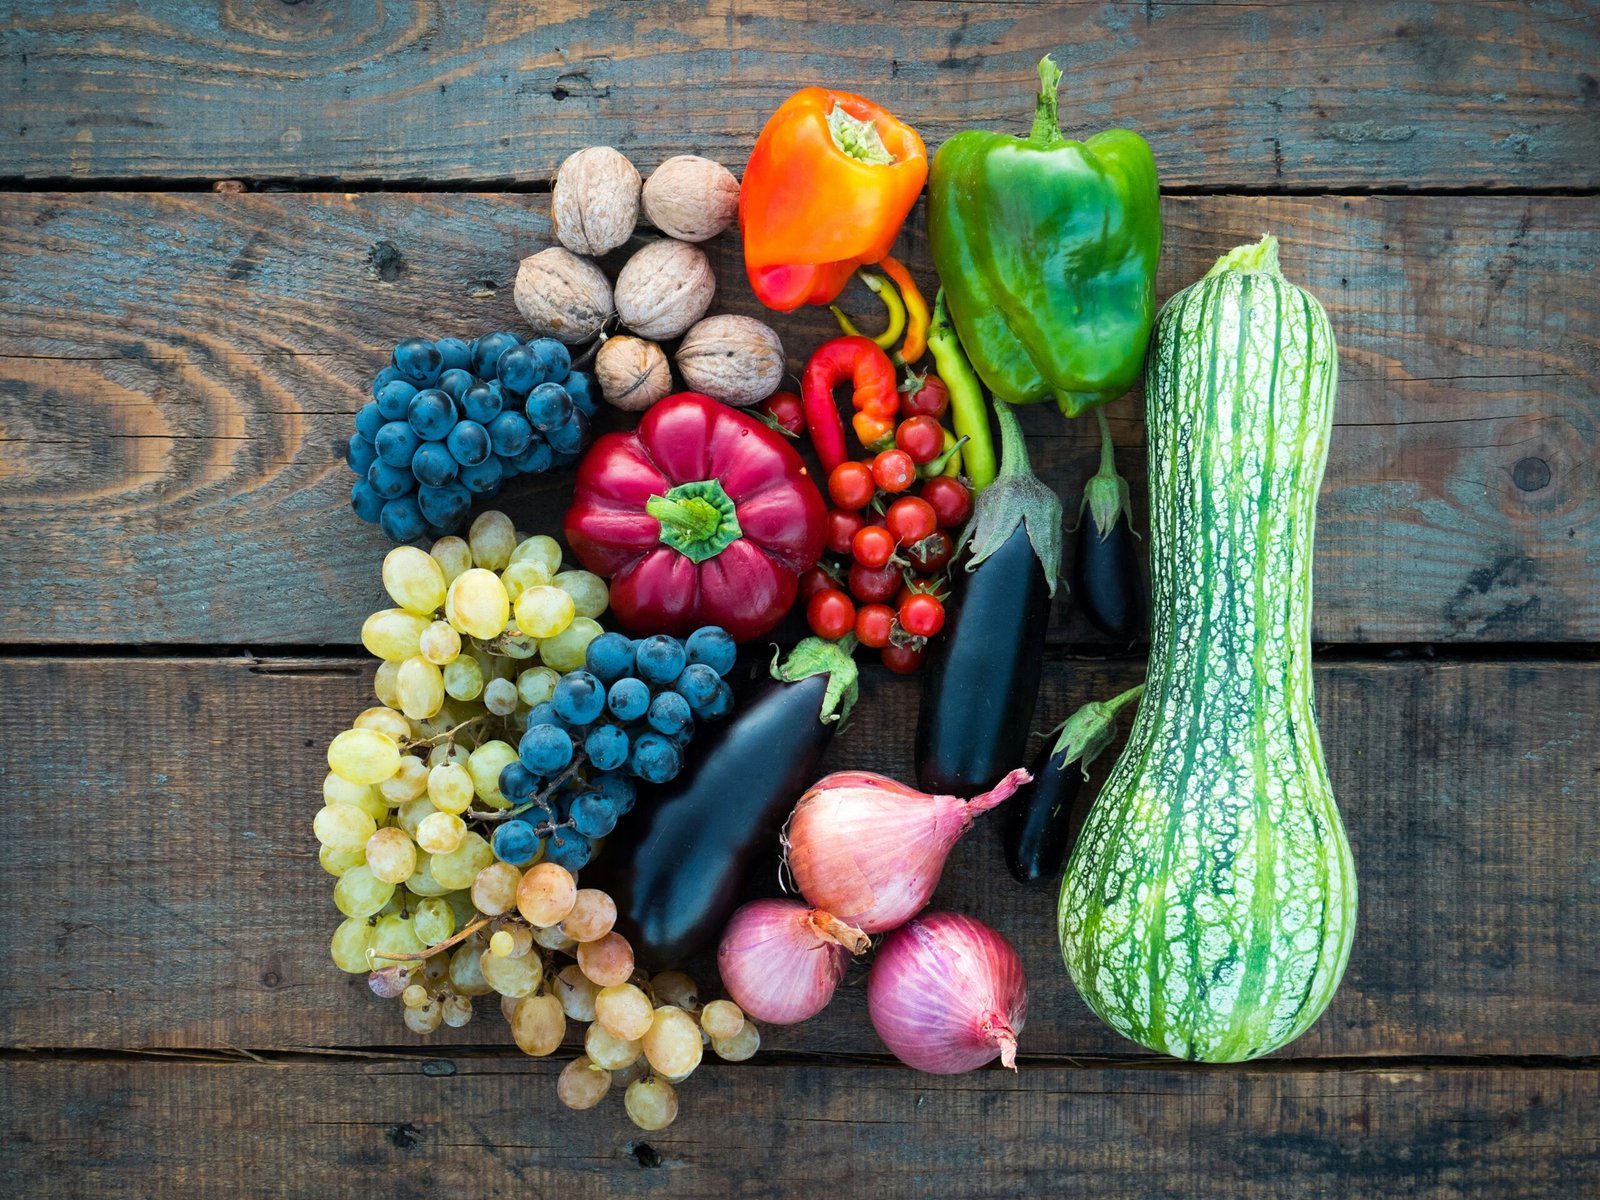 a variety of fruits and vegetables on a wooden surface